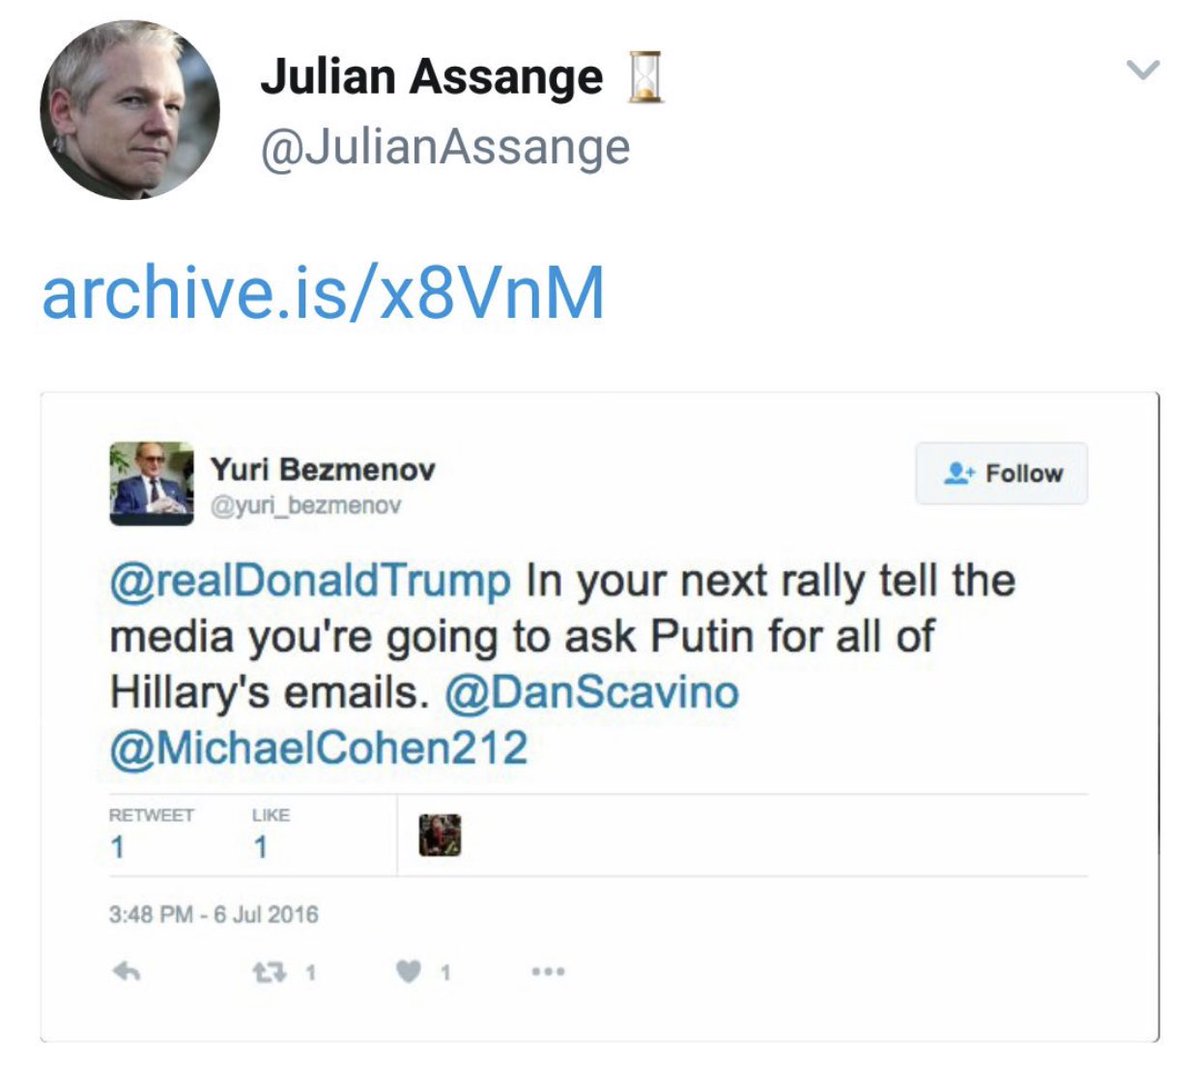   @yuri_bezmenov’s tweet instructing  @realDonaldTrump to ask Putin for Hillary’s emails was so IMPORTANT that  @julianAssange ARCHIVED IT @EvanMcMullin  @ProjectLincoln